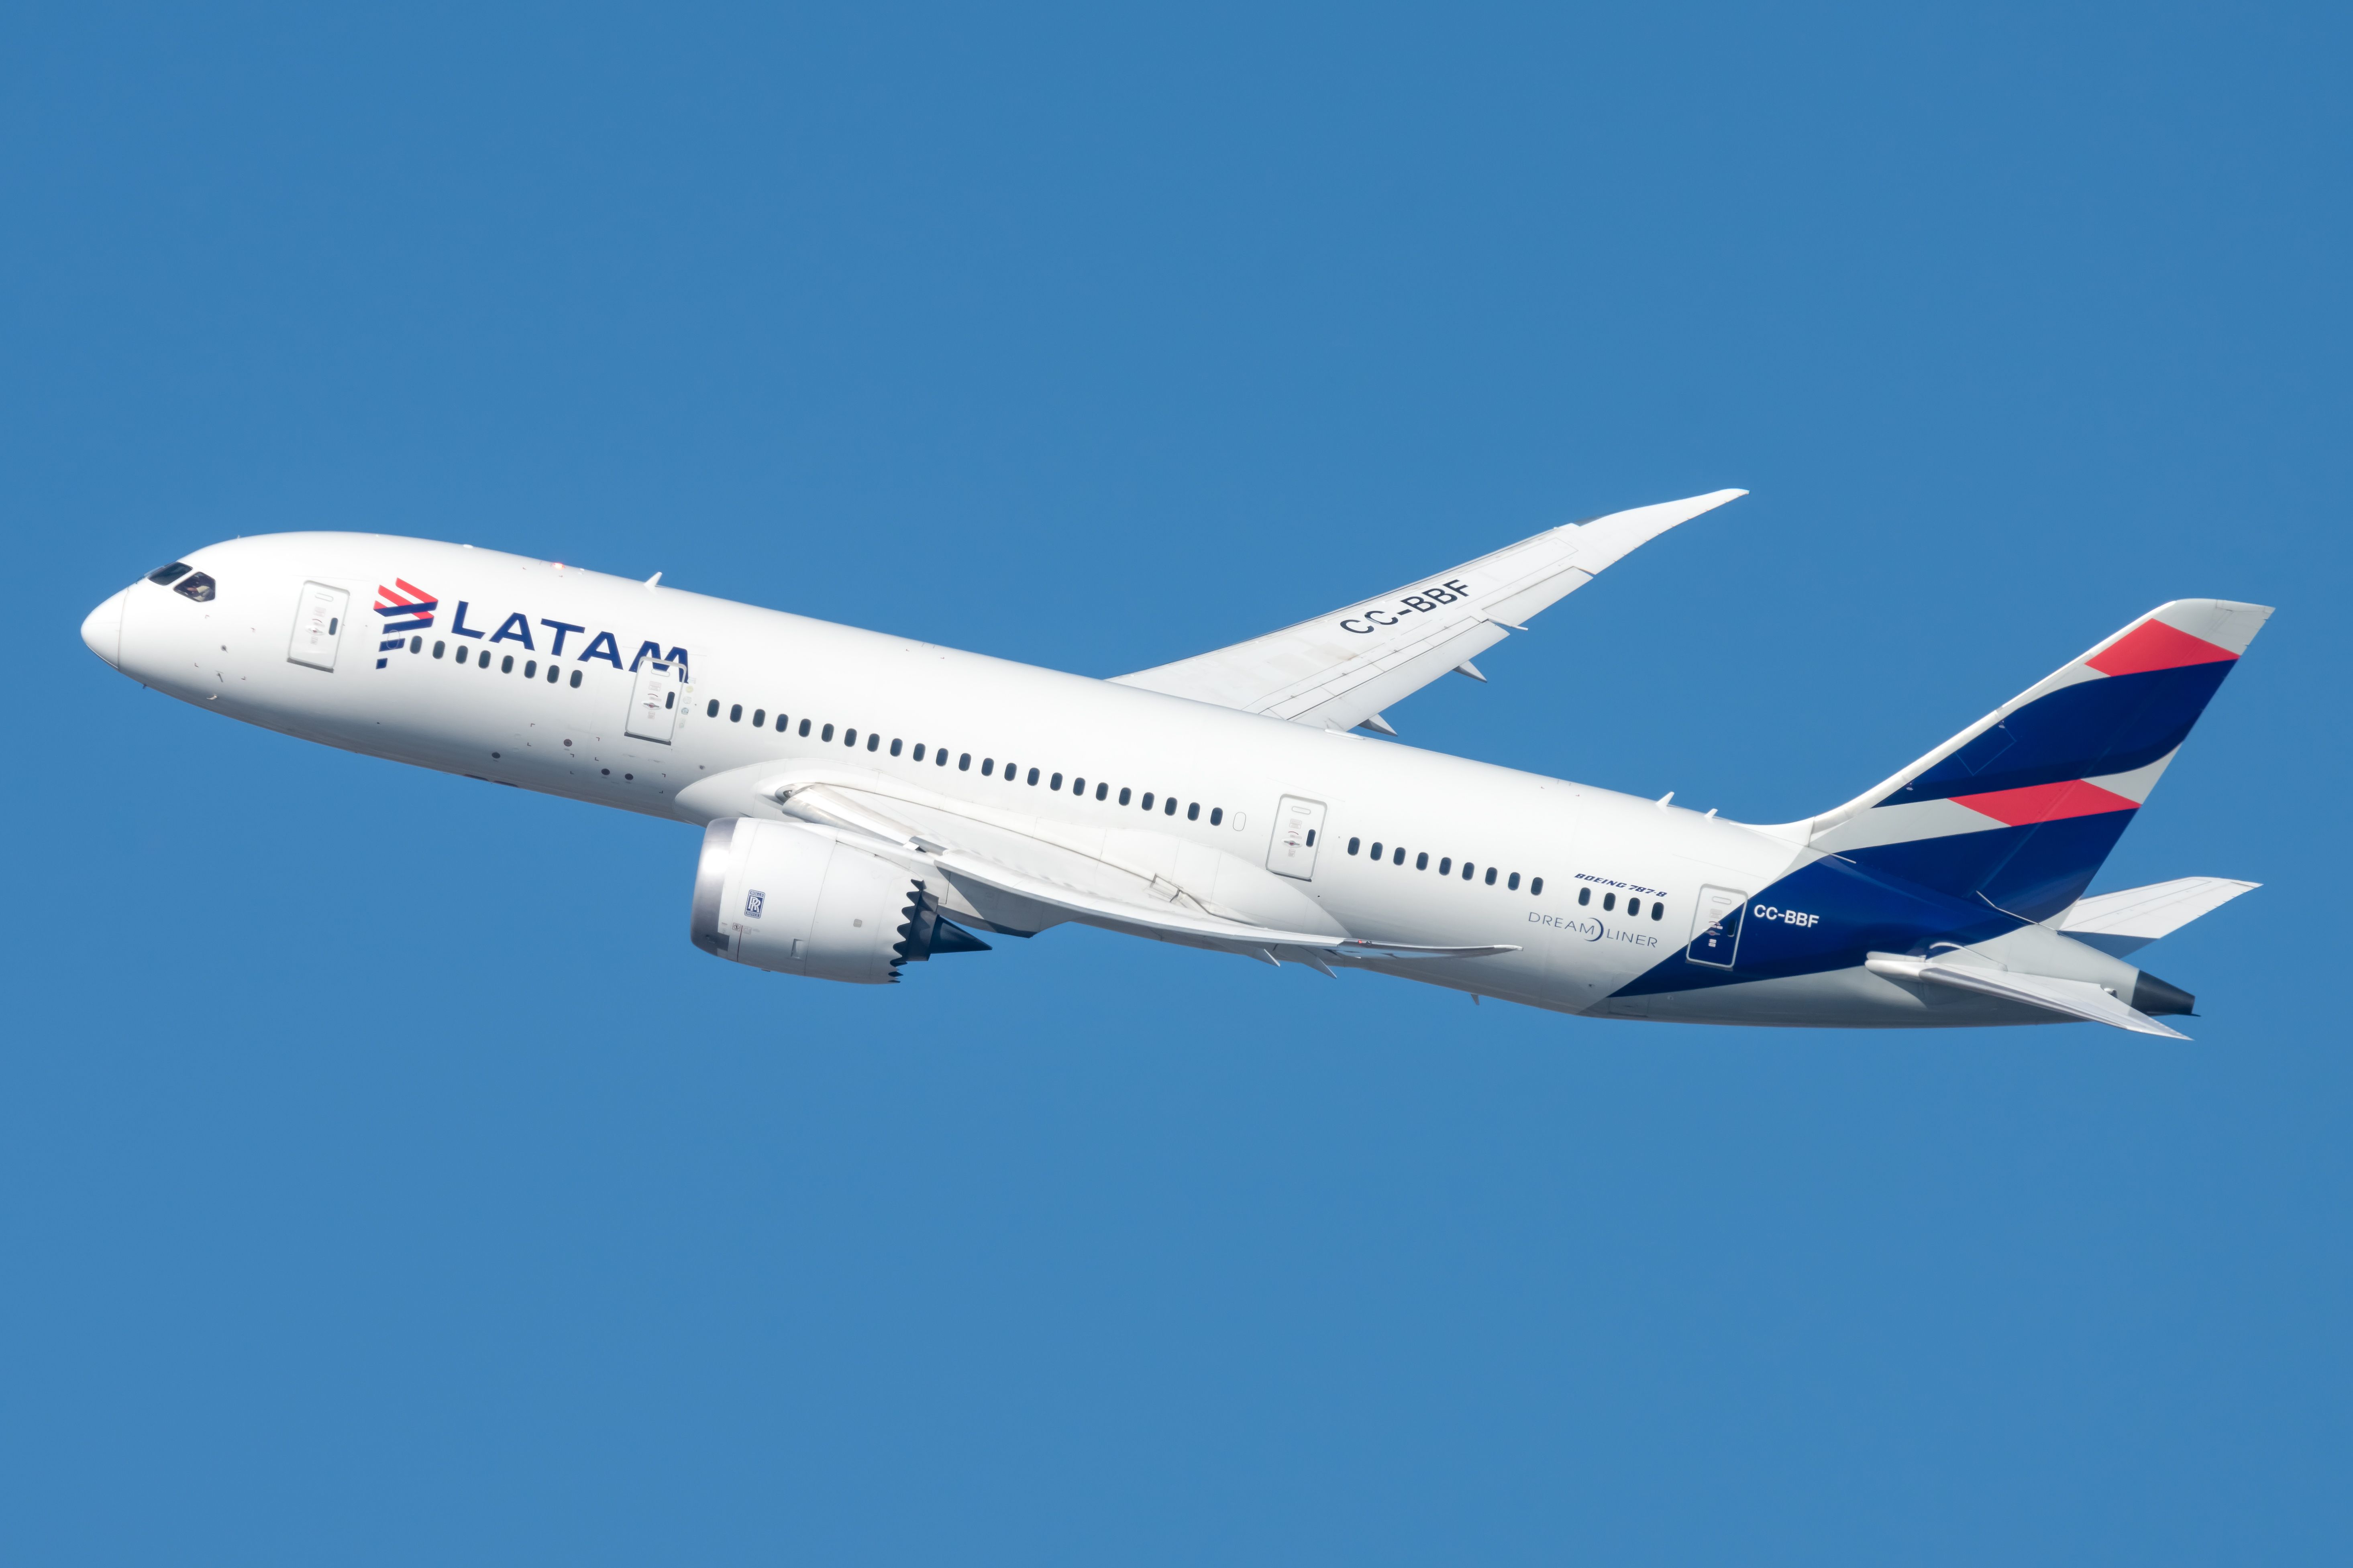 LATAM Brasil cancelled or delayed flight compensation and refund